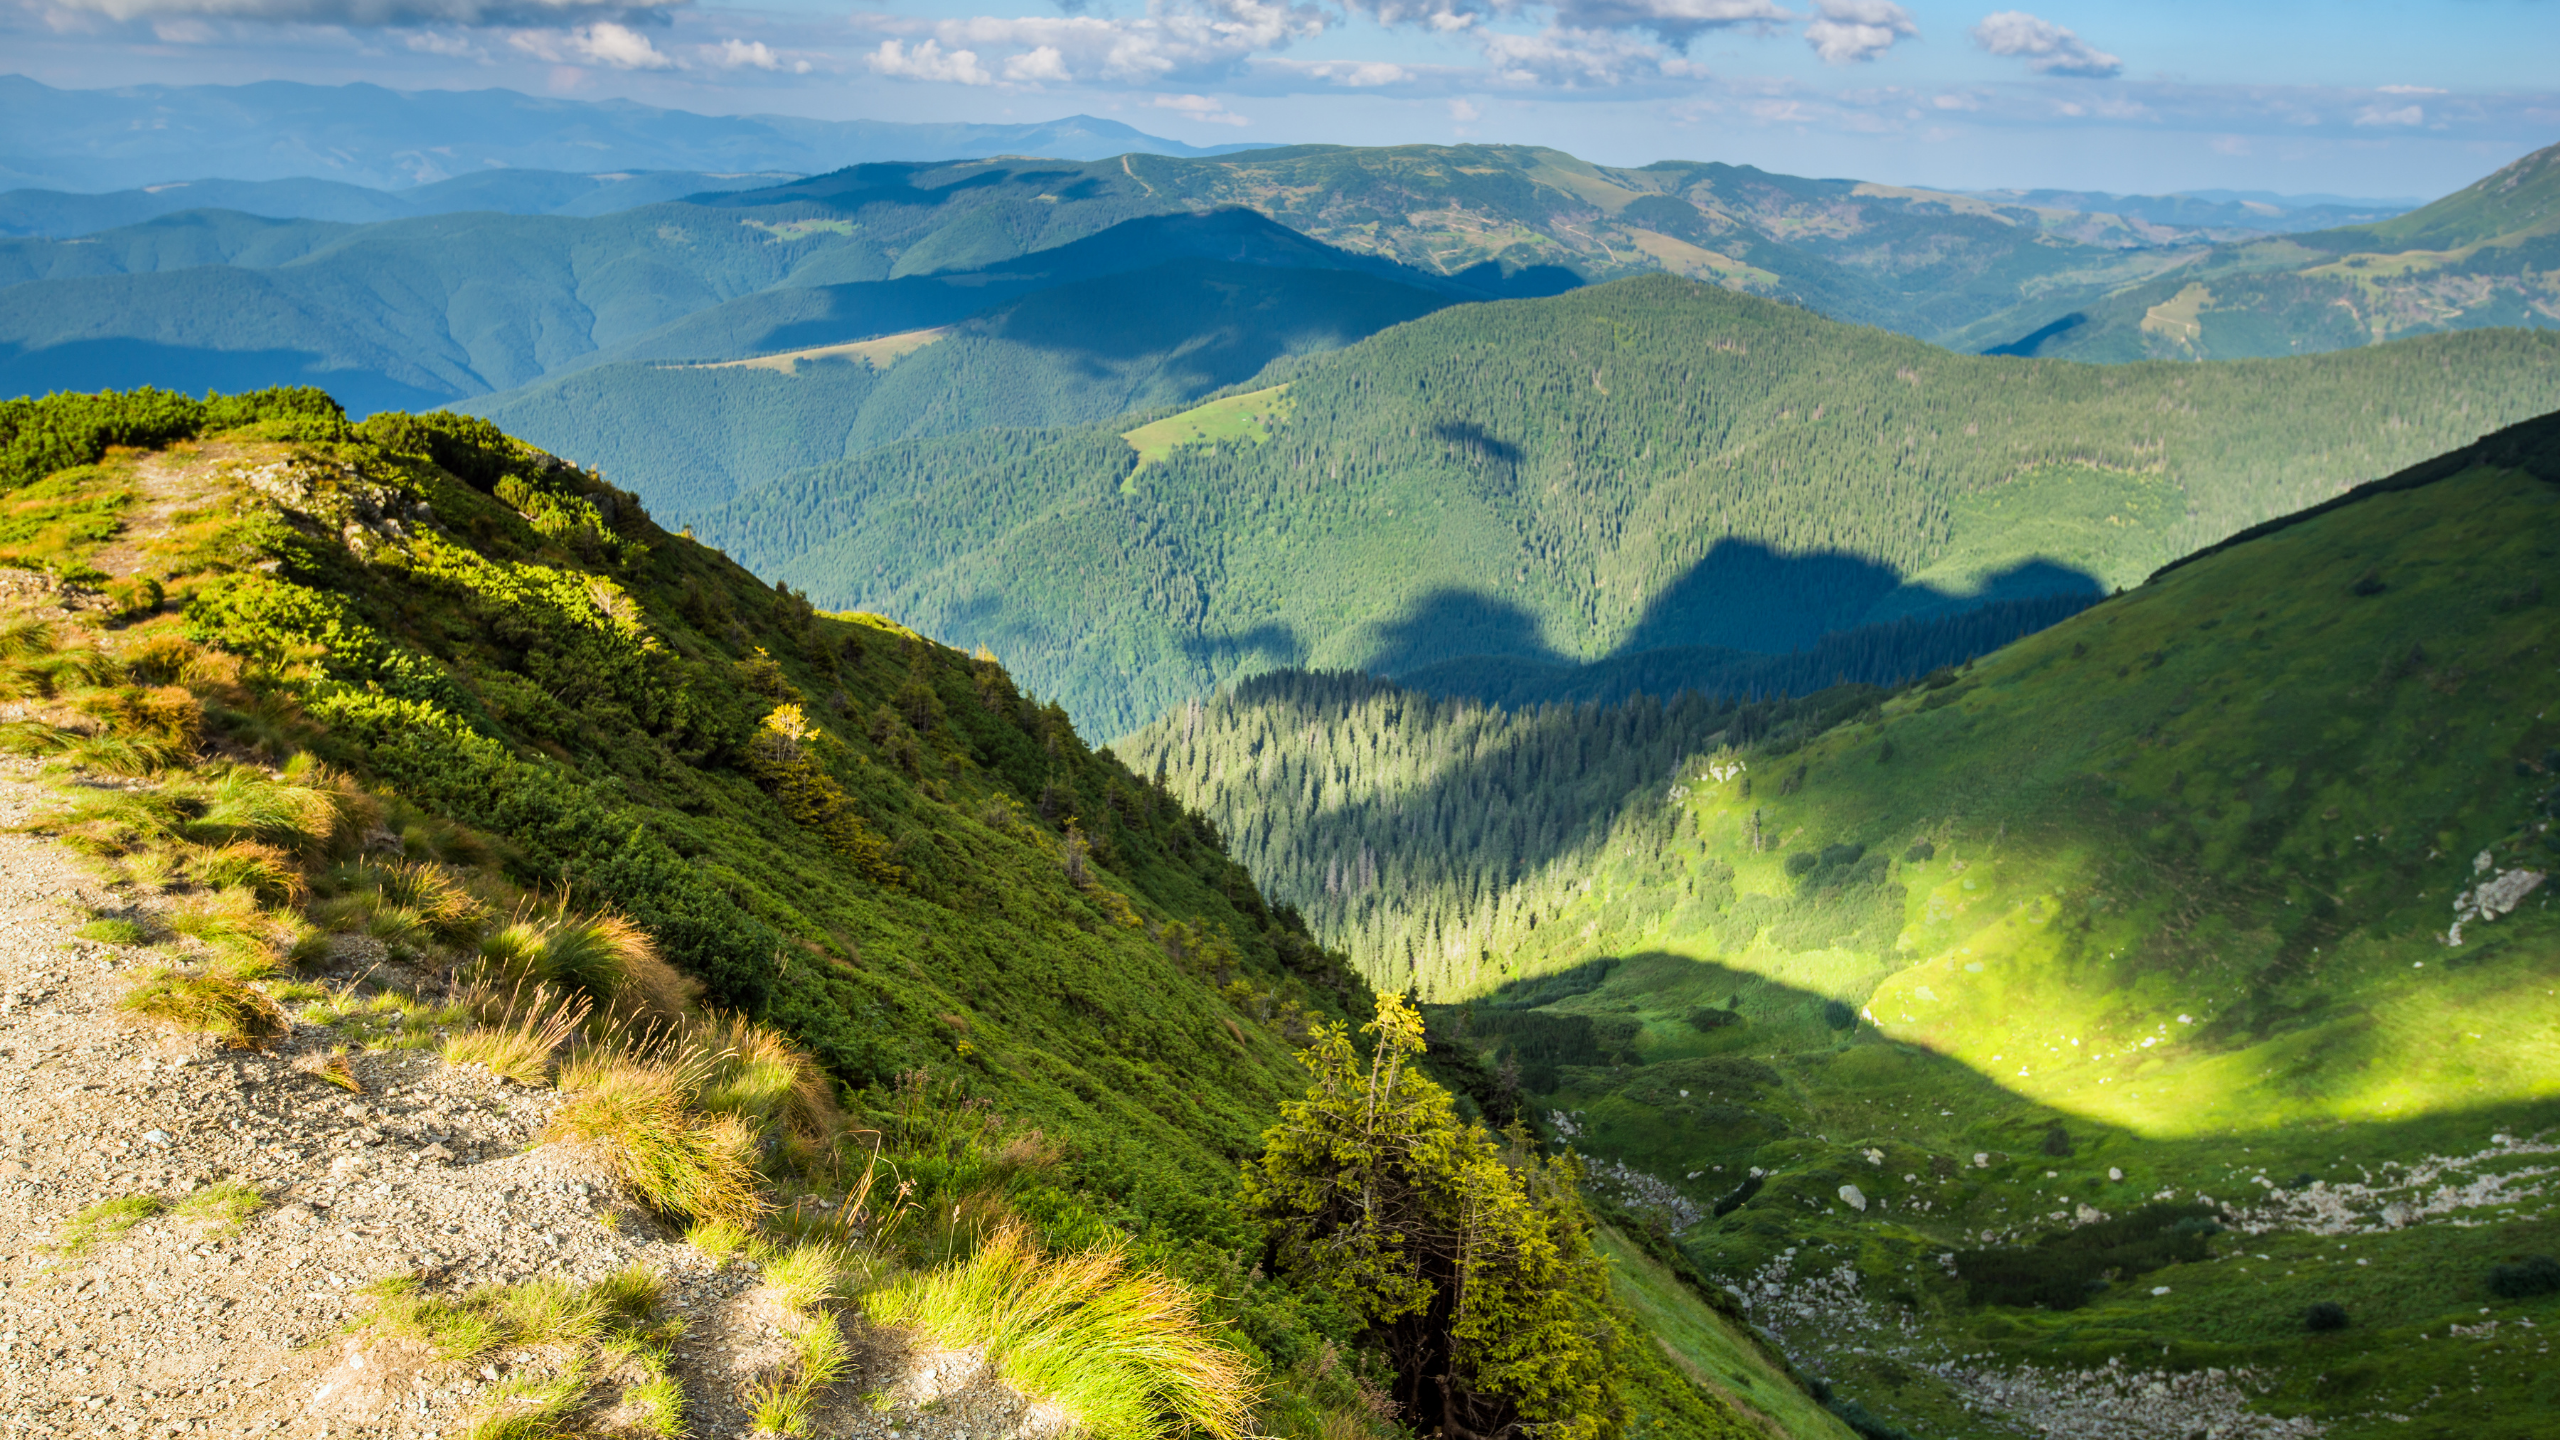 The Carpathian Mountains of Eastern Europe stretch across Urkaine